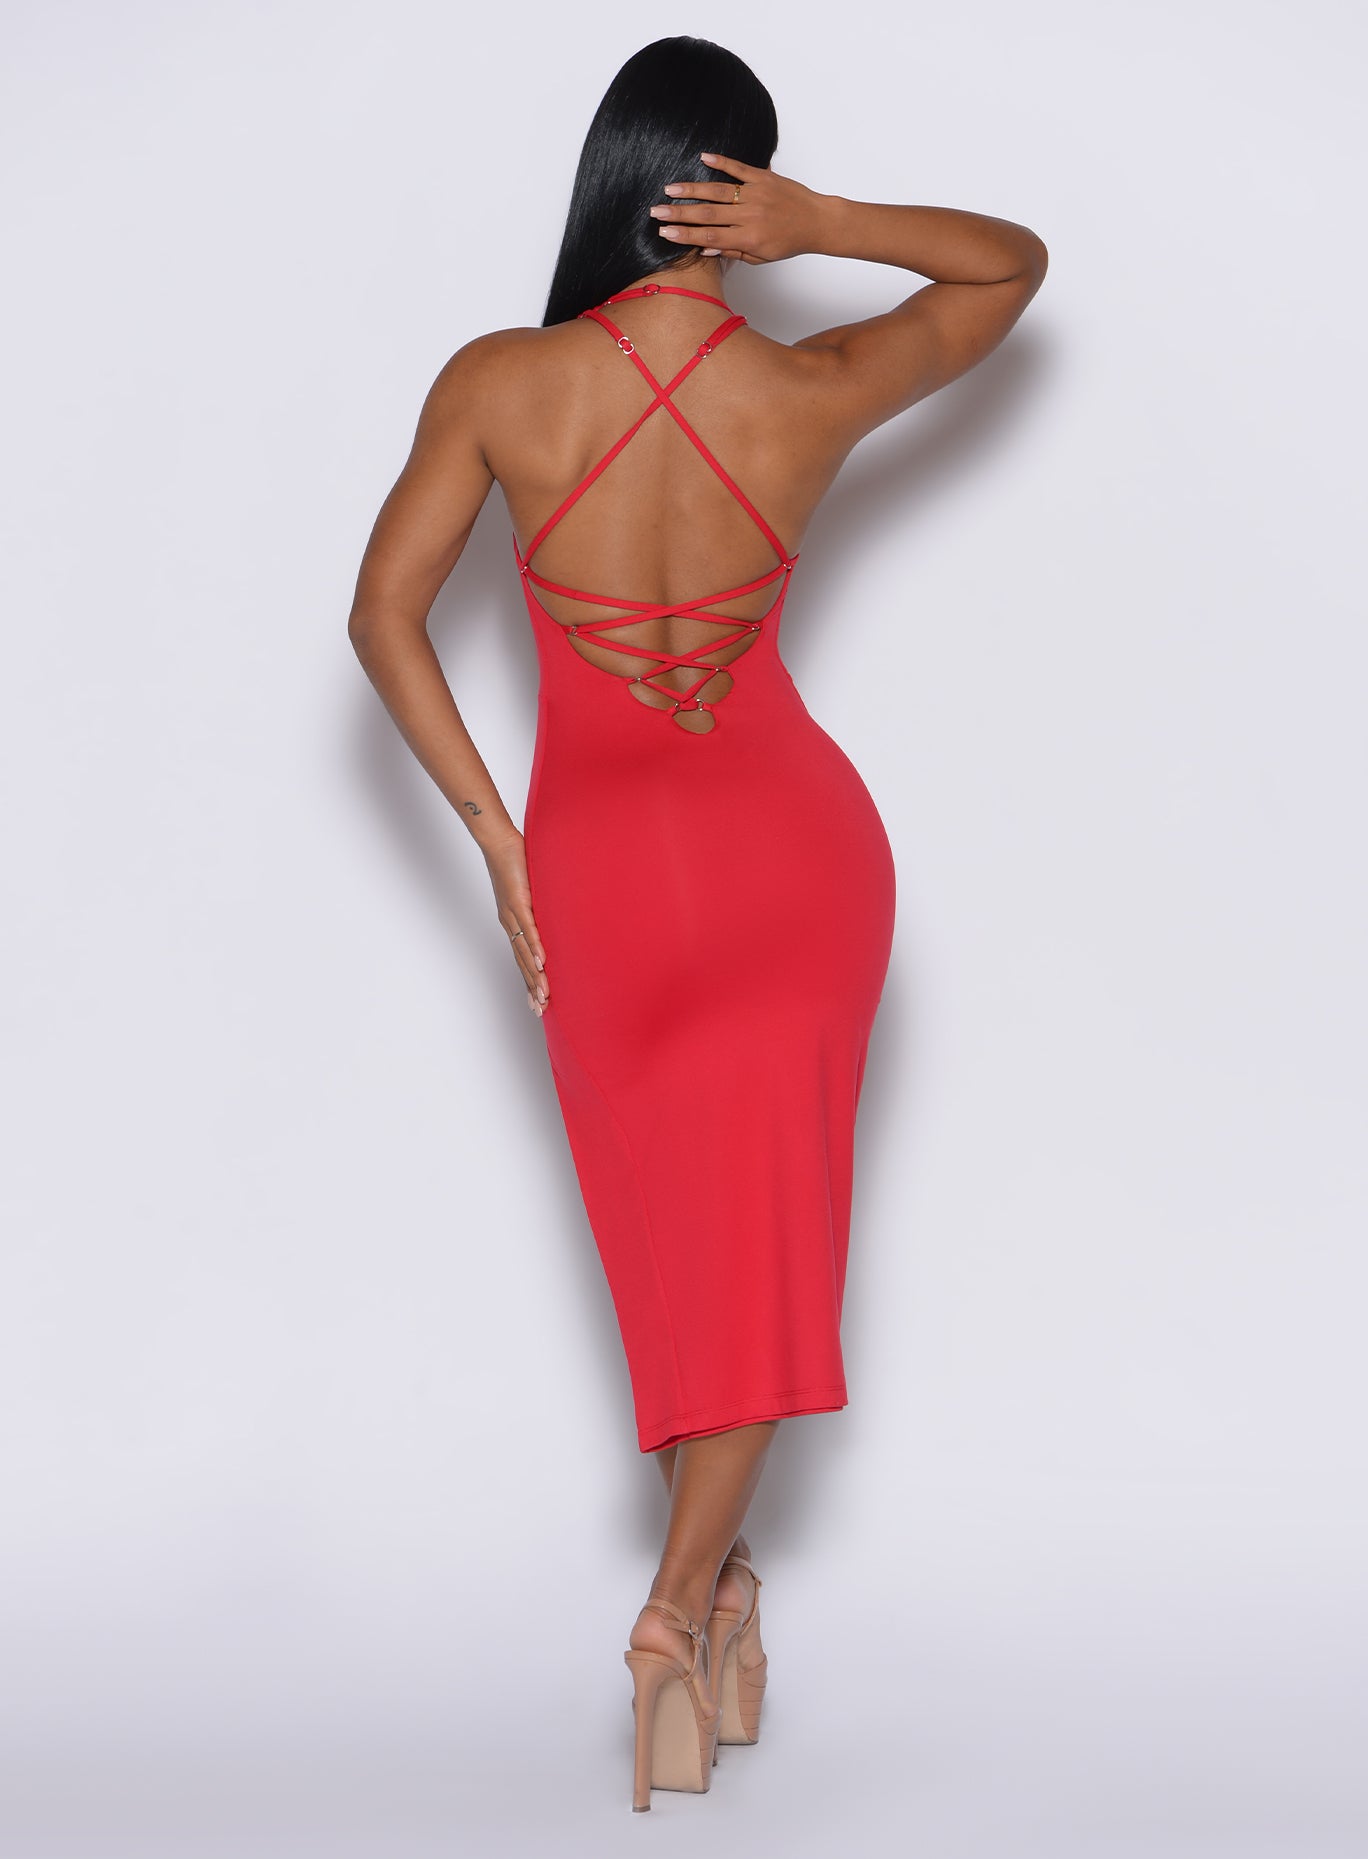 back  profile view of a model wearing our bright red dress with criss cross adjustable straps at the back